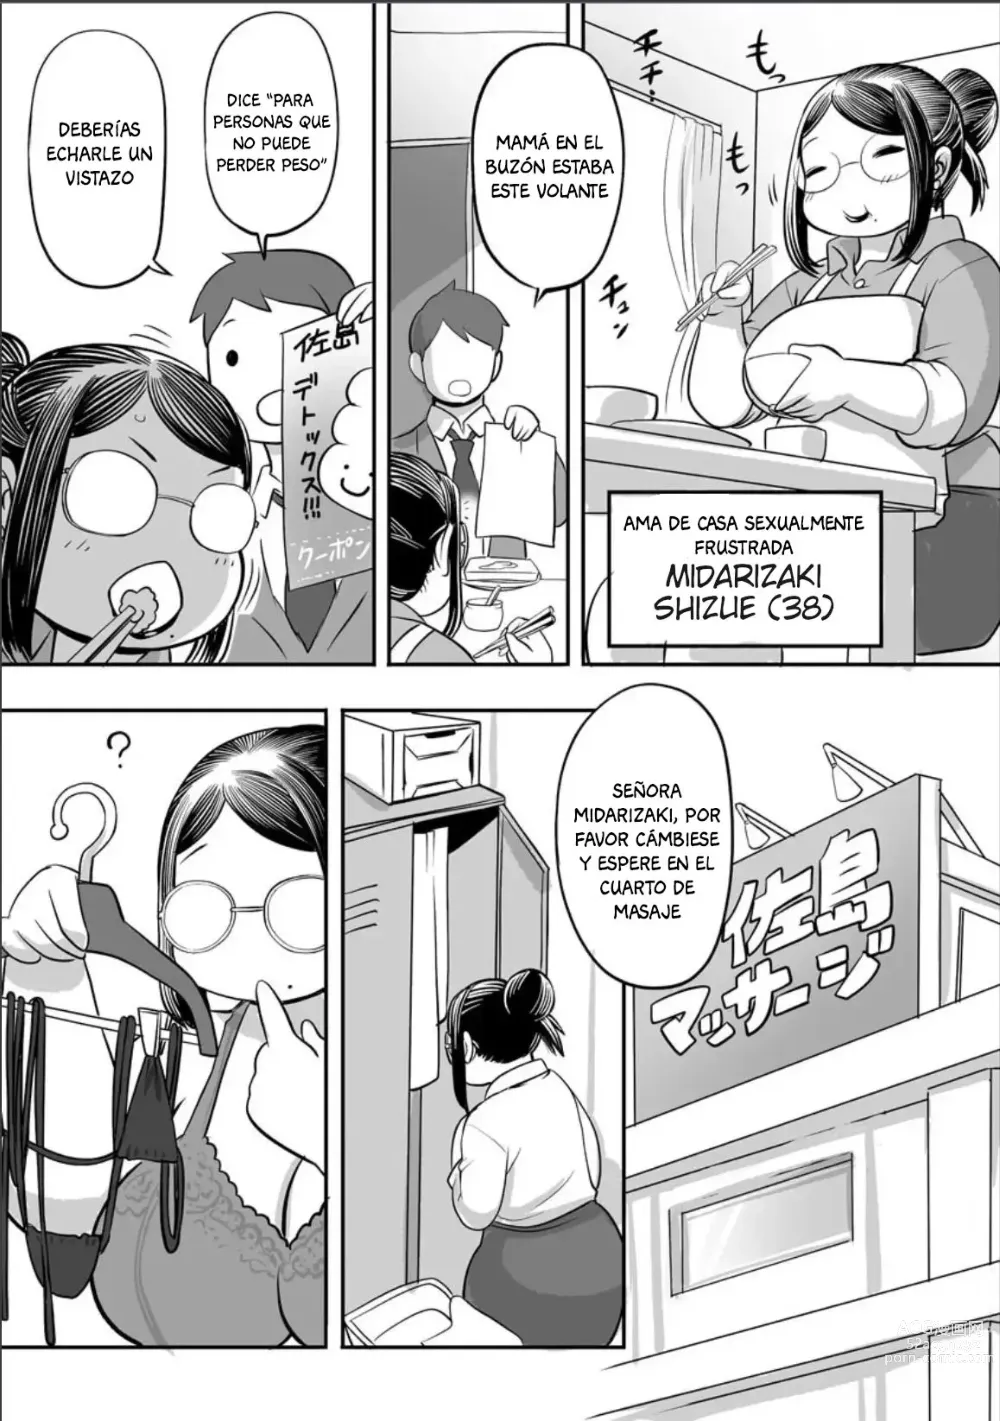 Page 2 of manga Sexually frustrated housewife Shizue is going to get a massage